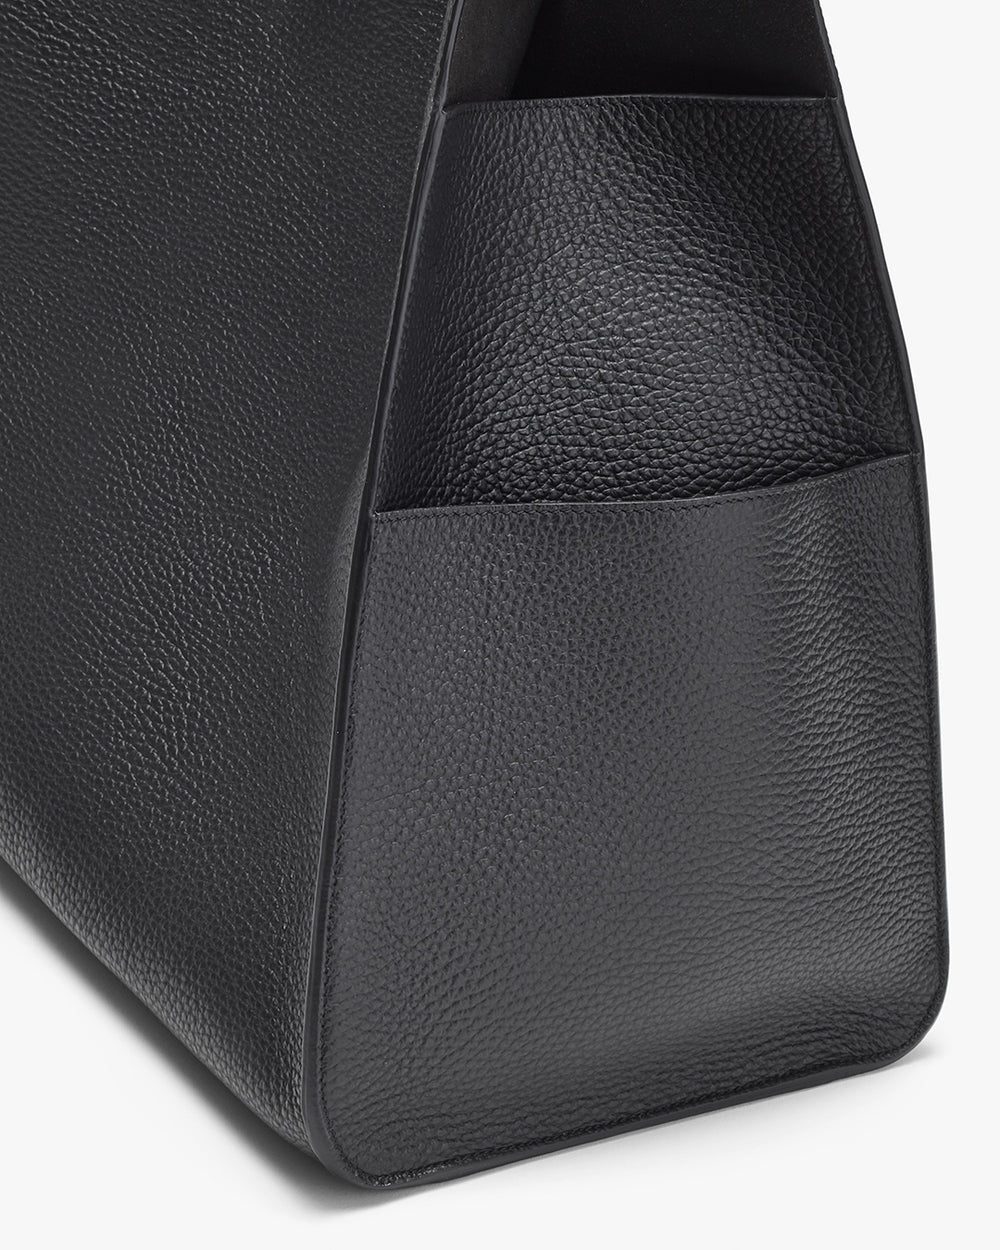 Close-up view of a textured bag with an exterior pocket.